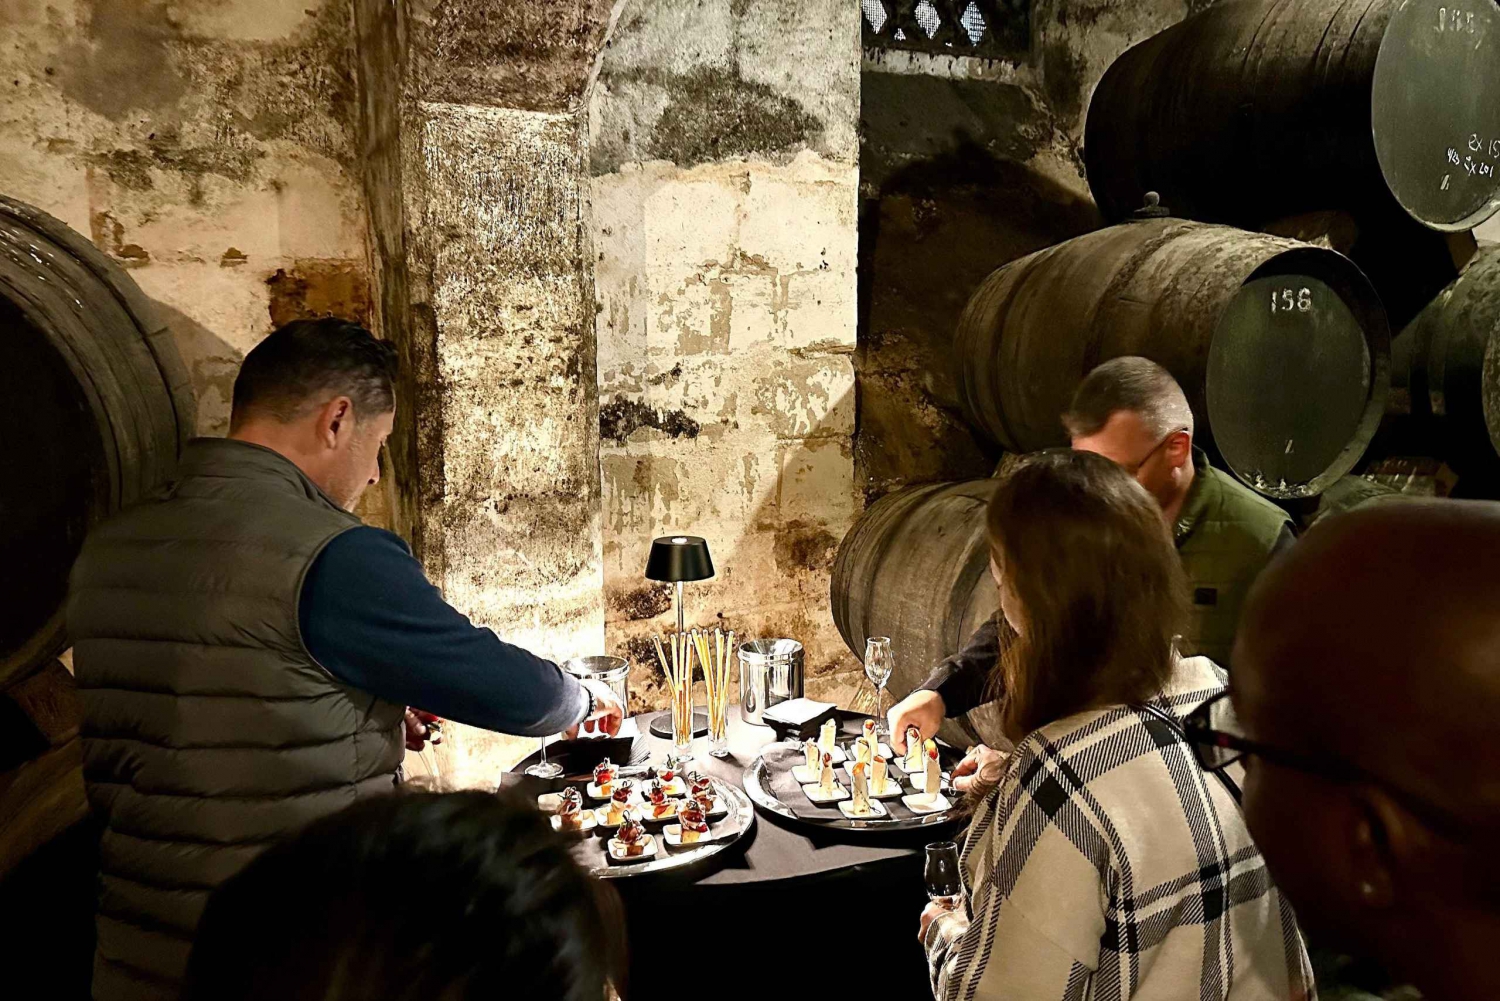 Palma: Distillery Tour with 3 Spirits and Tapas Tasting